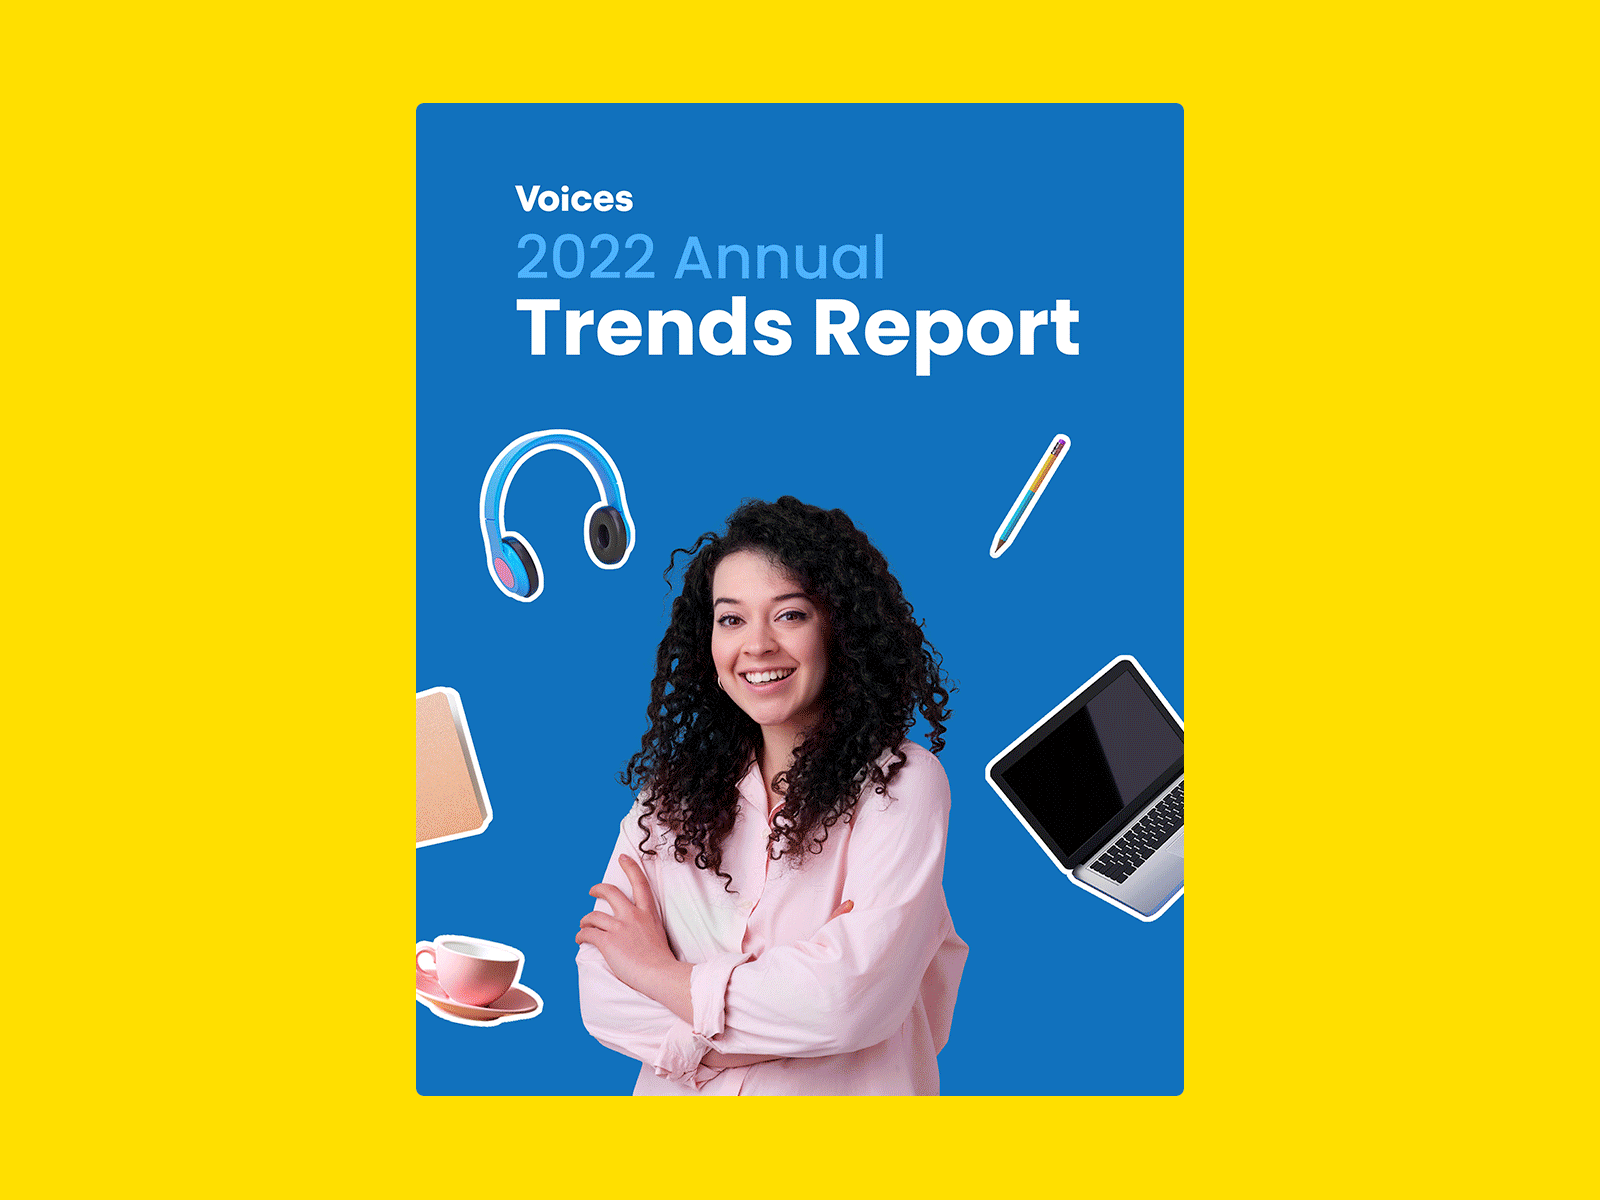 Annual Report PDF acrobat annual audio branding charts design digital art editorial future of work graphs indesign layout pdf photo photo compositing report statistics trends voices woman